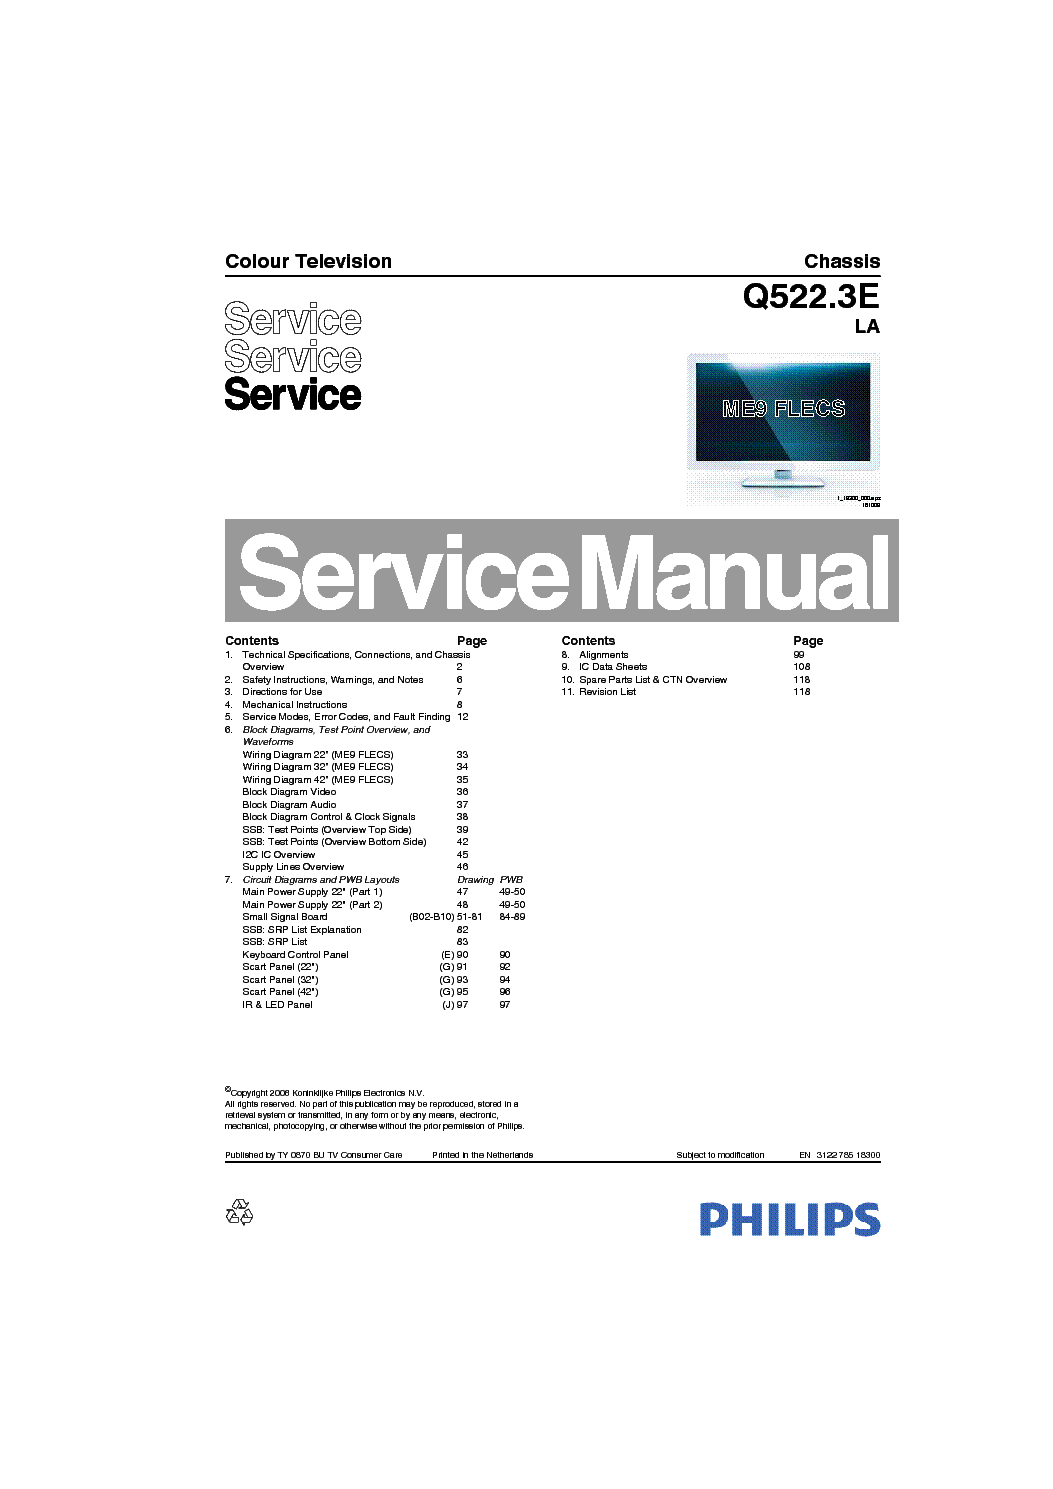 PHILIPS Q522.3ELA 312278518300 service manual (1st page)